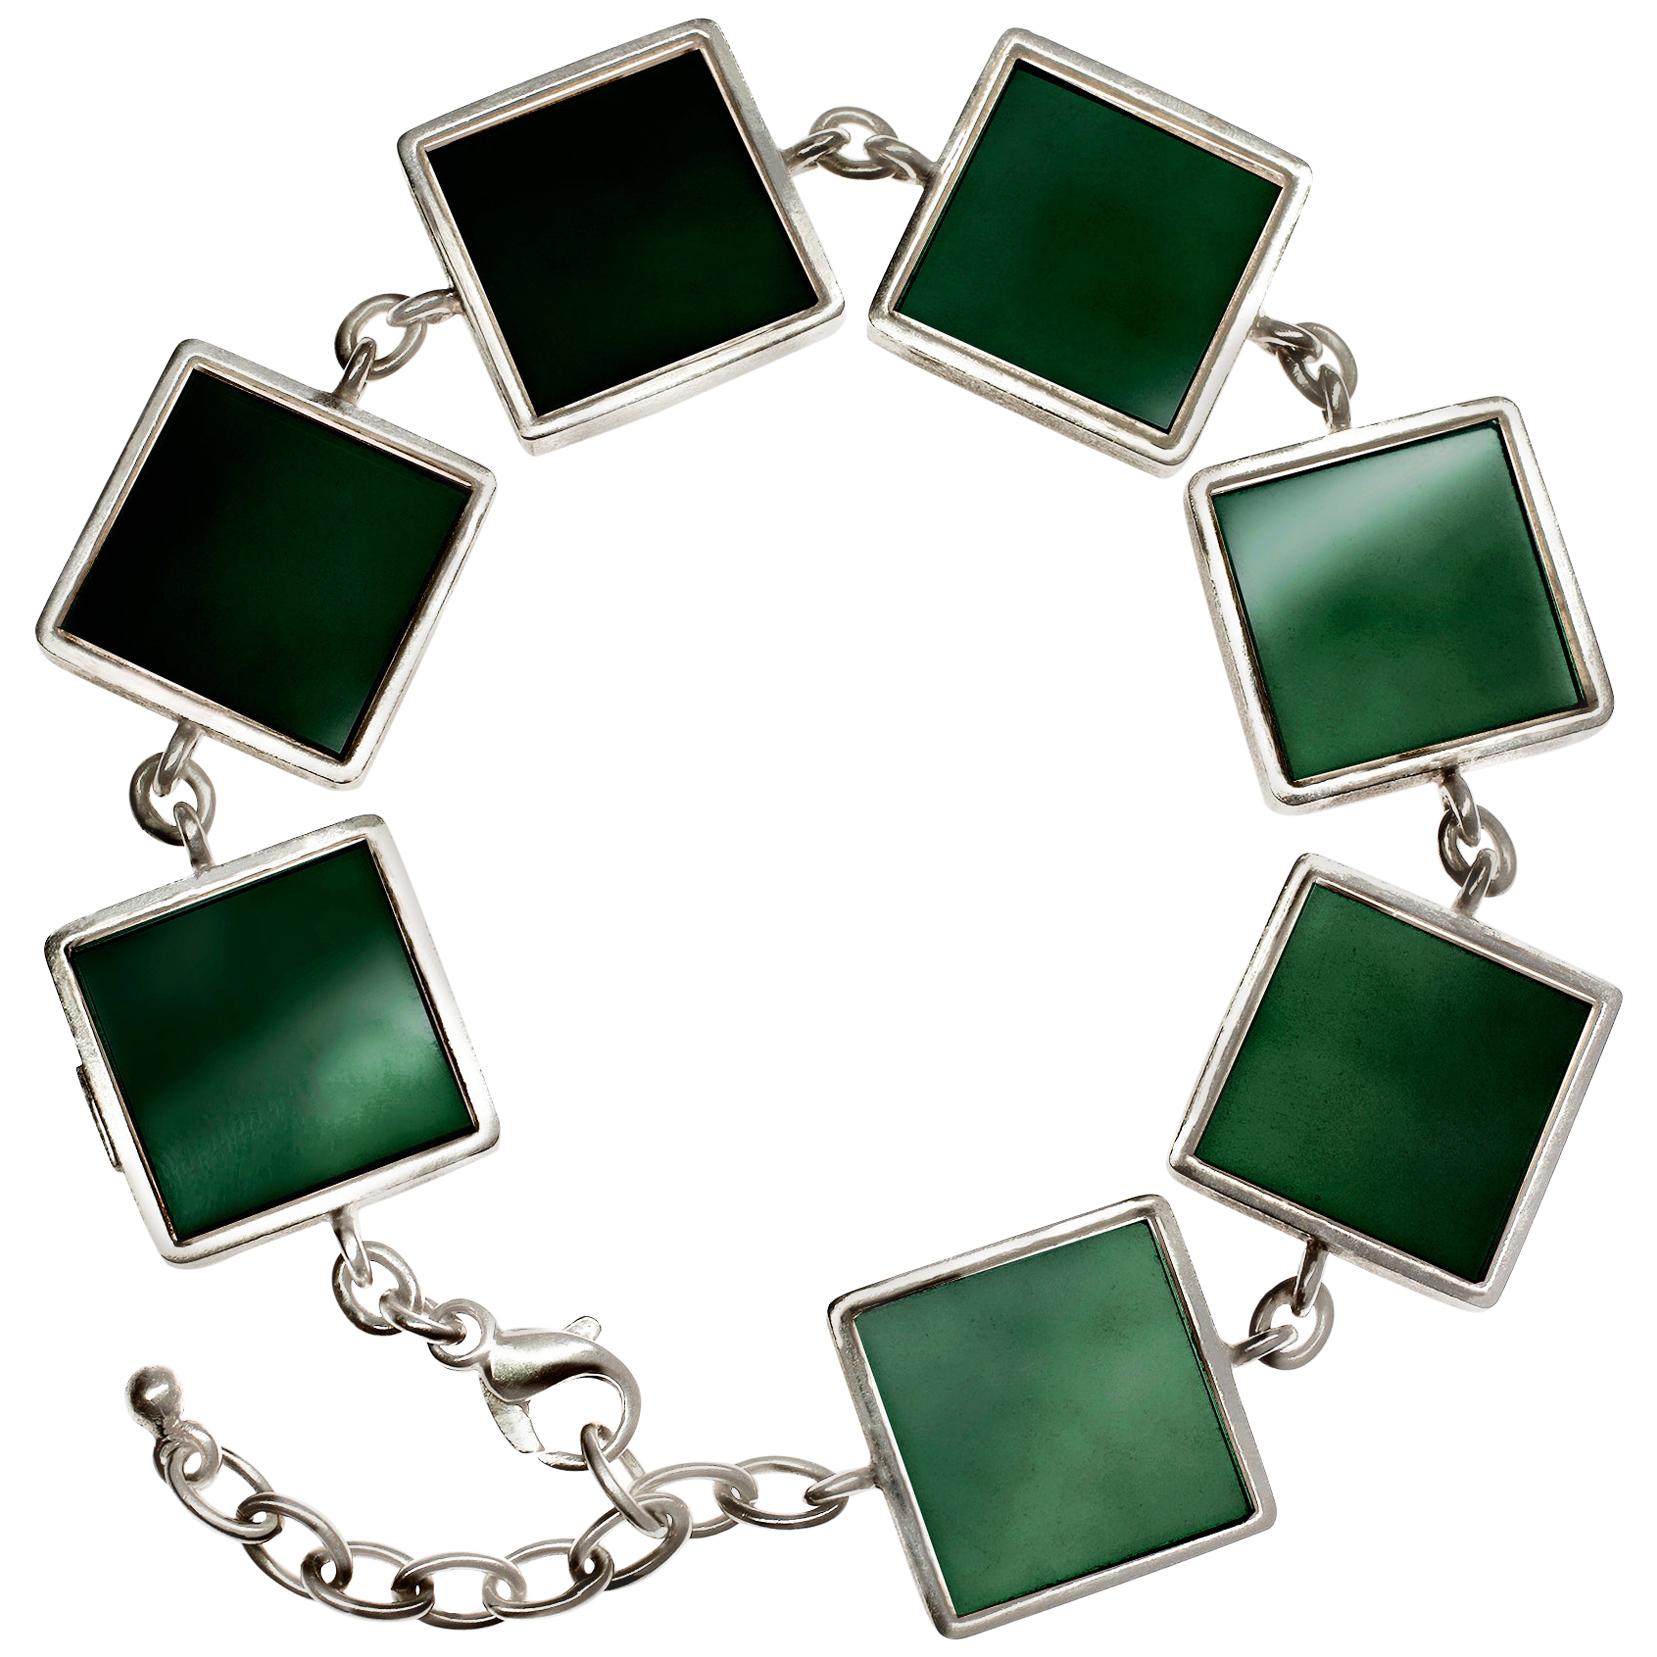 Featured in Vogue White Gold Art Deco Style Bracelet with Dark Green Quartzes For Sale